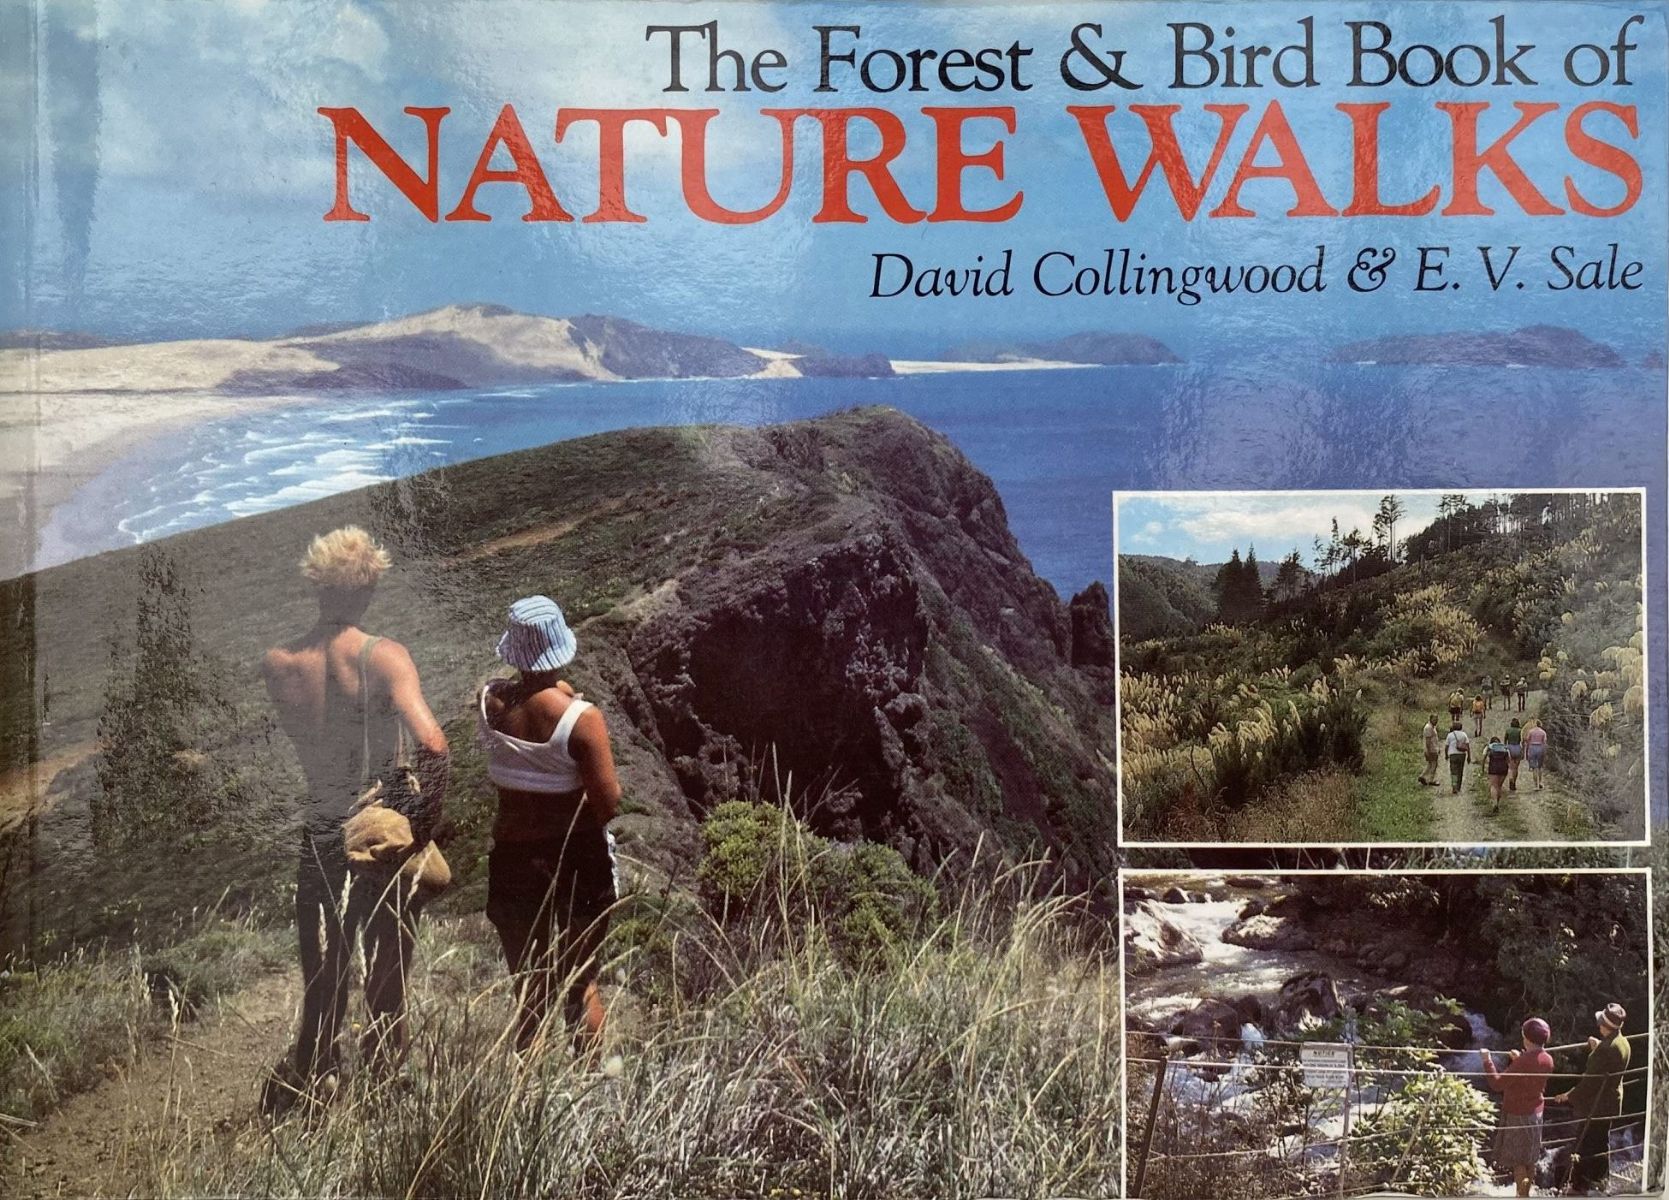 The Forest and Bird Book of NATURE WALKS